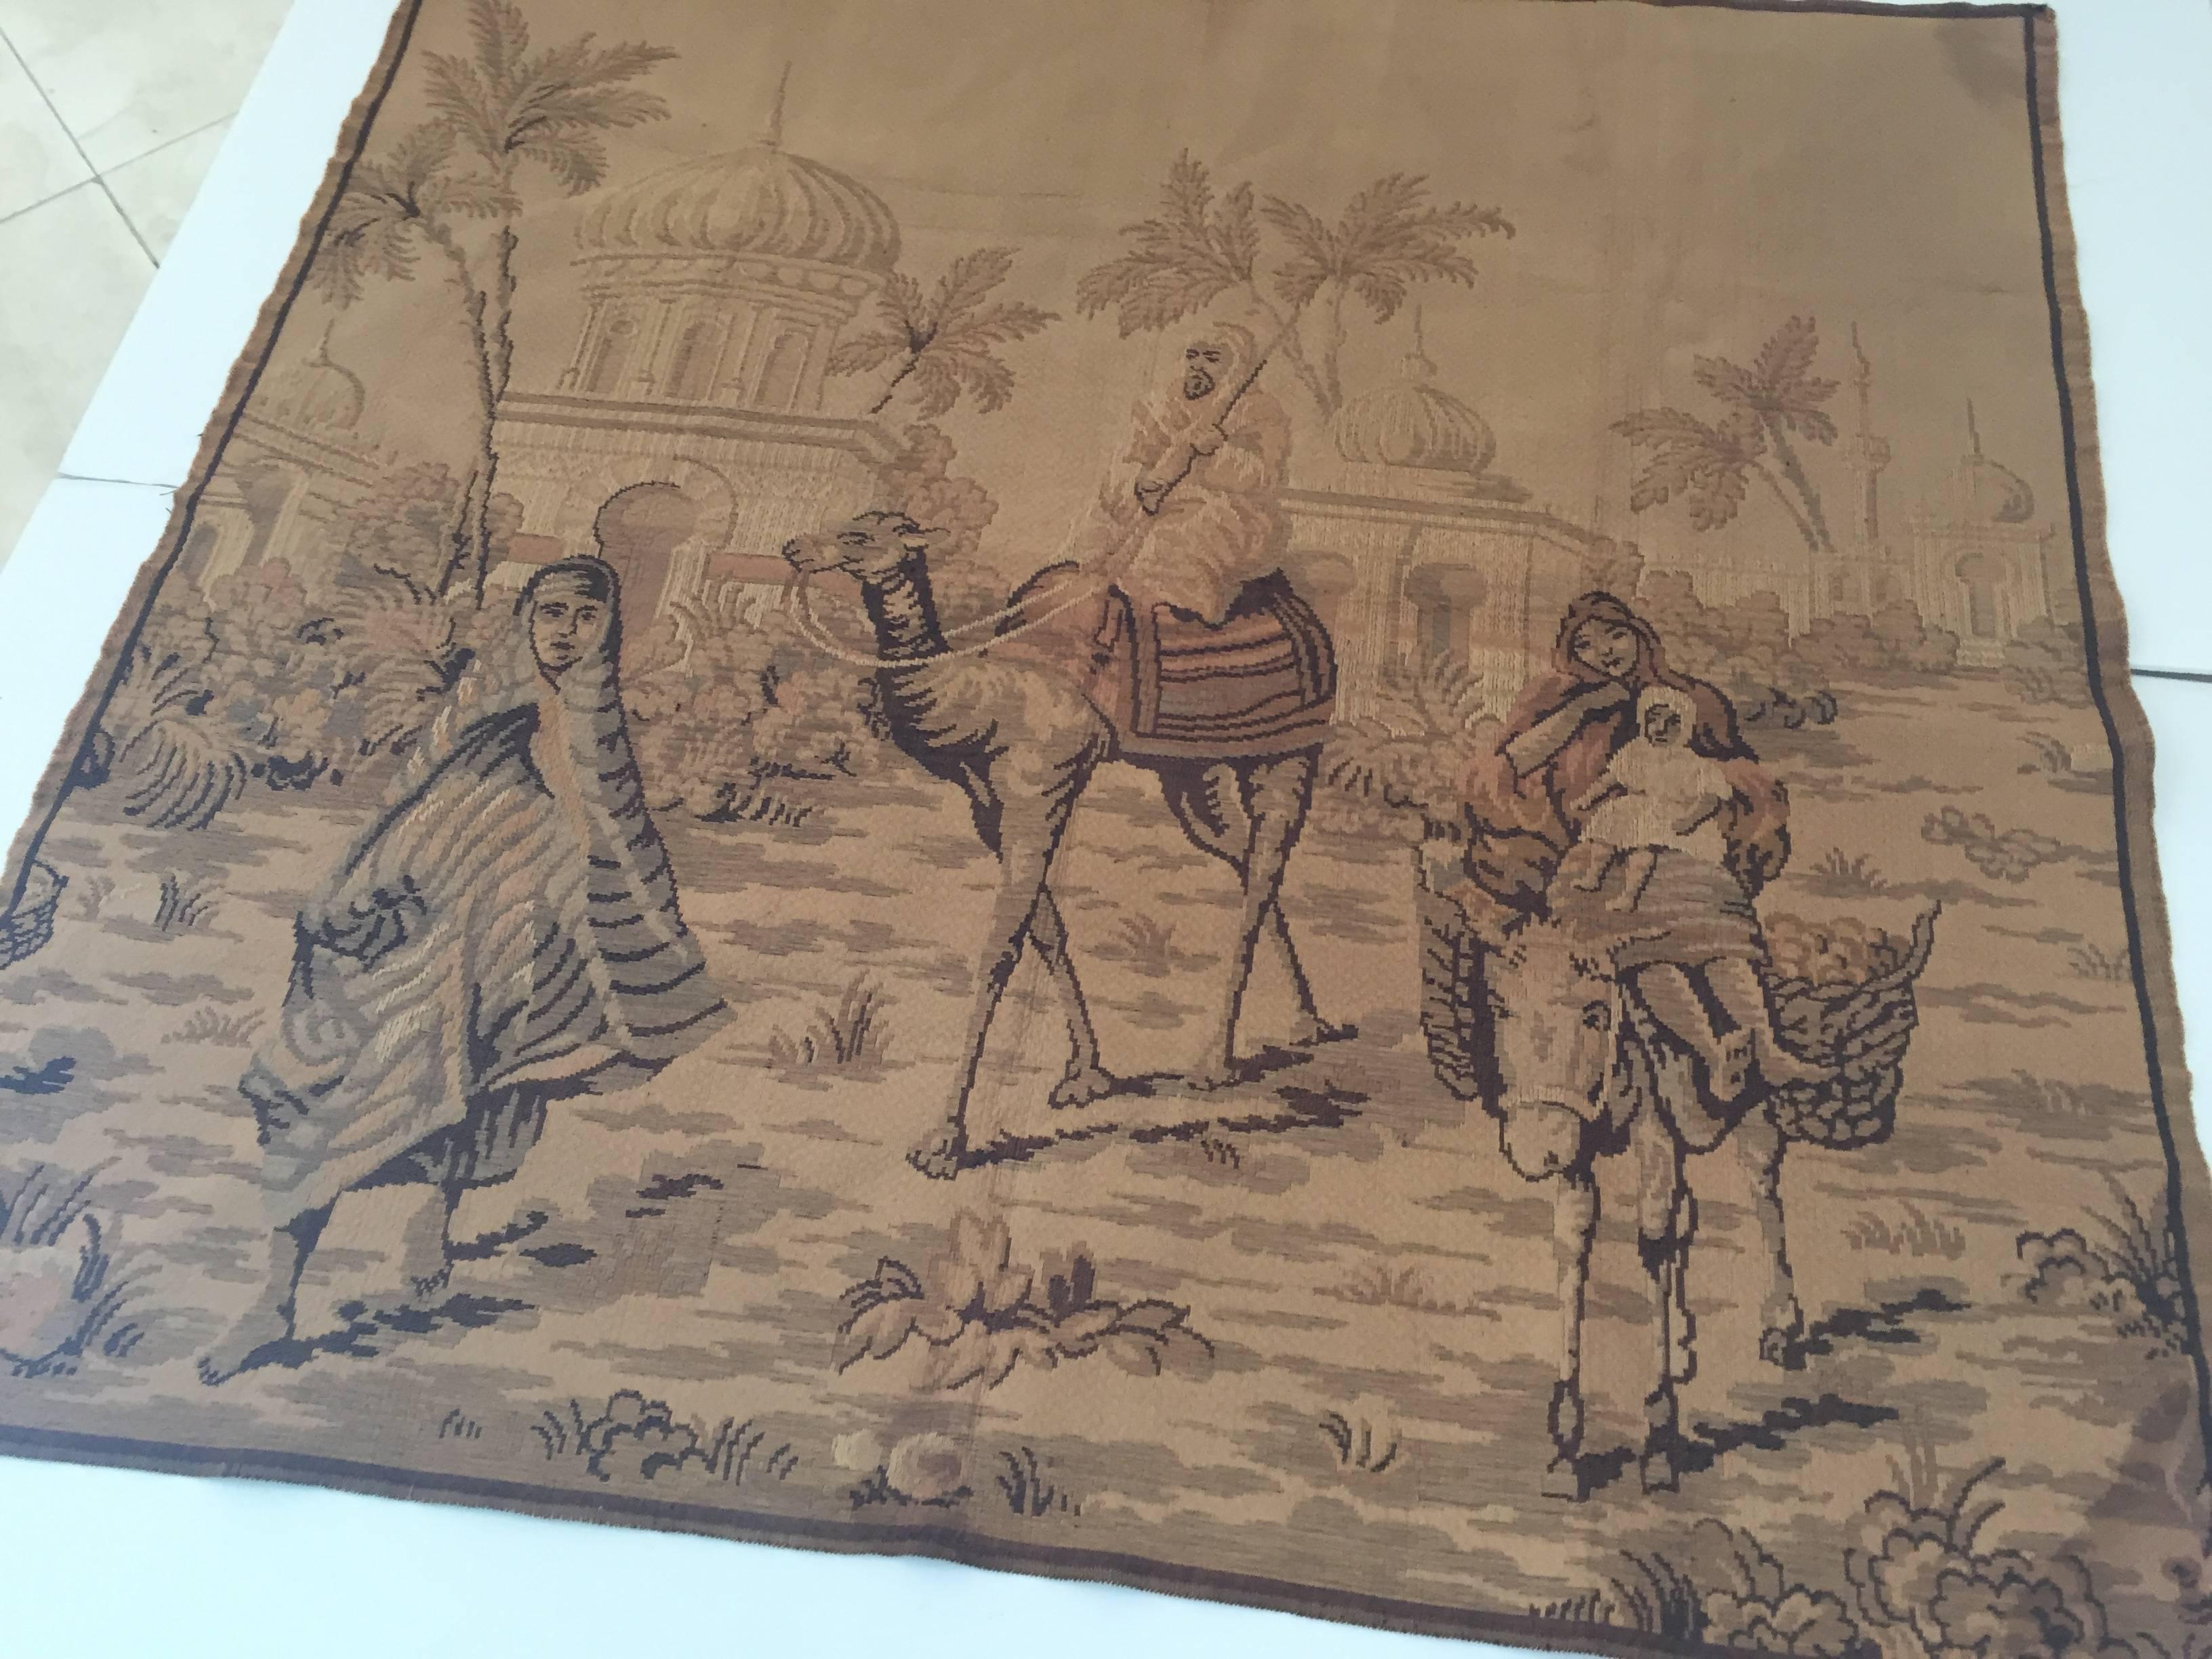 Large Aubusson style Tapestry with an orientalist 19th century scene depicting Arabs figures and Middle Eastern Moorish architecture in the background.
Probably a scene in North Africa, Morocco, with a master on camel and women on a donkey and